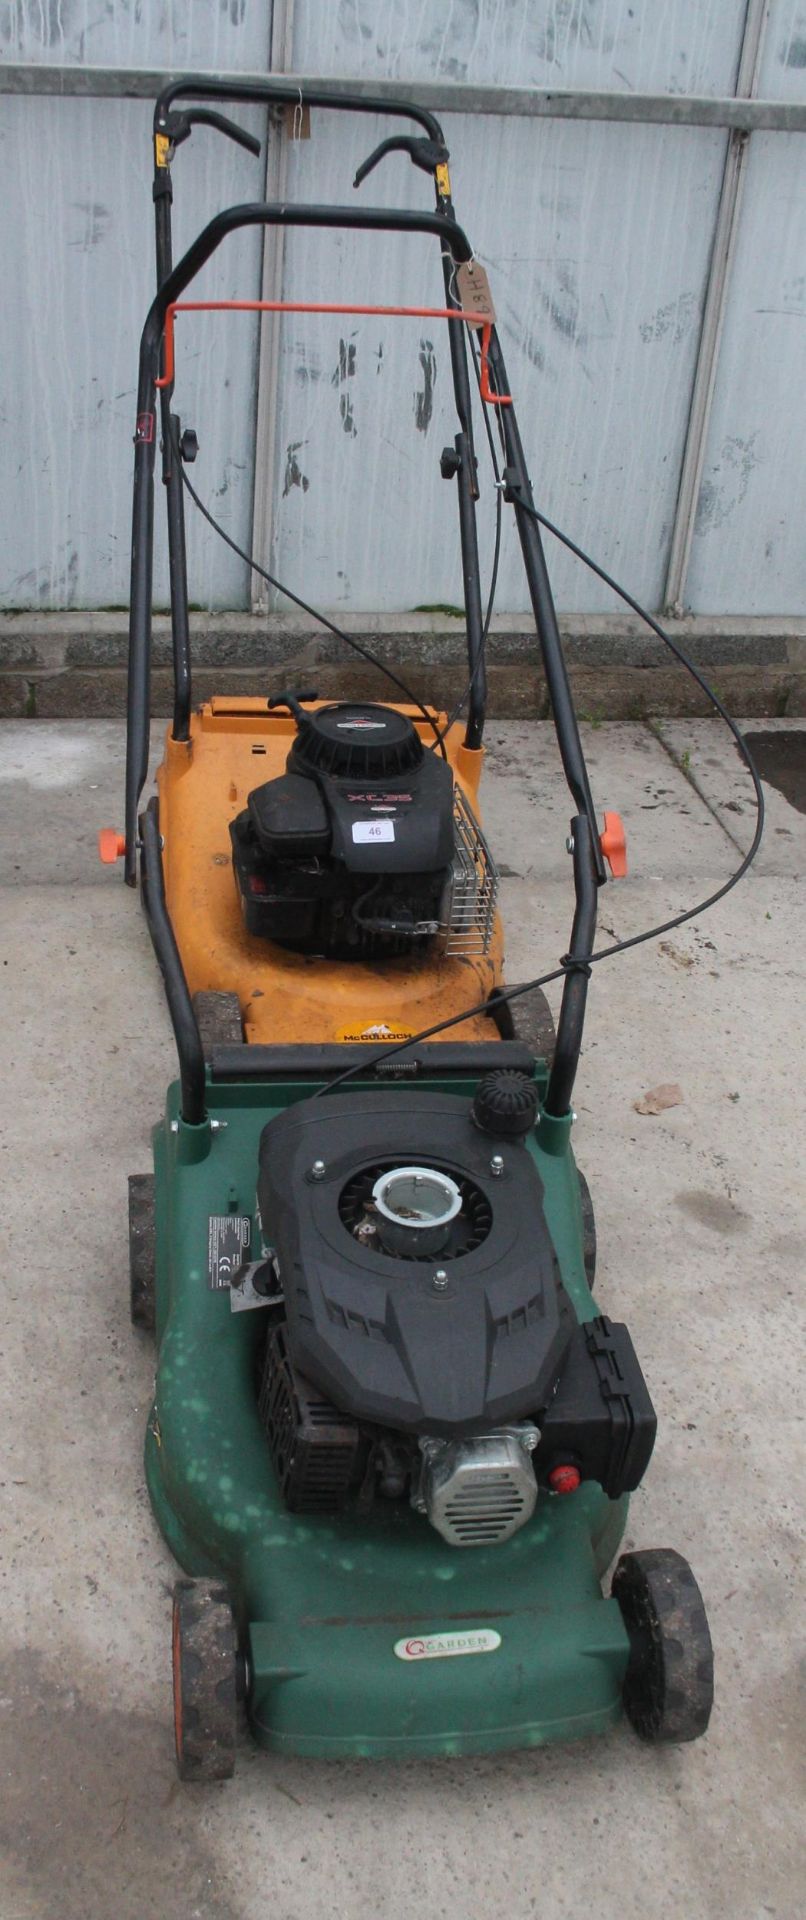 A Q GARDEN SELF PROPELLED PETROL ROTARY MOWER WITH A BRIGGS & STRATTON ENGINE - NO VAT